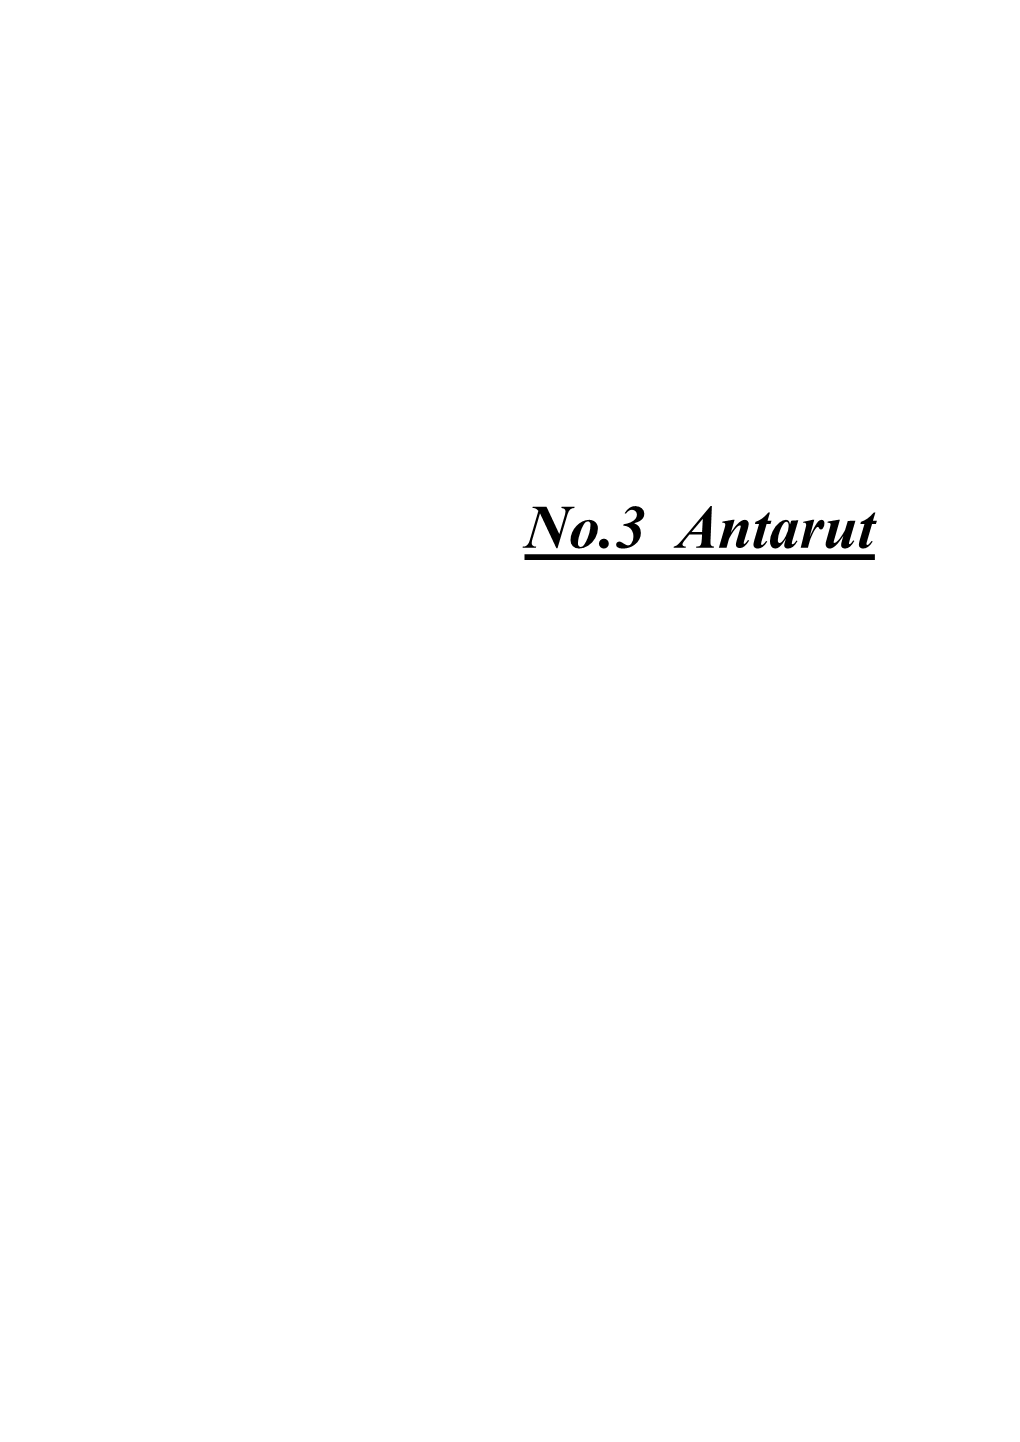 No.3 Antarut Study for Improvement of Information on Existing Water Sources Rural Water Supply and Sewage Systems in RA (Aragatsotn)